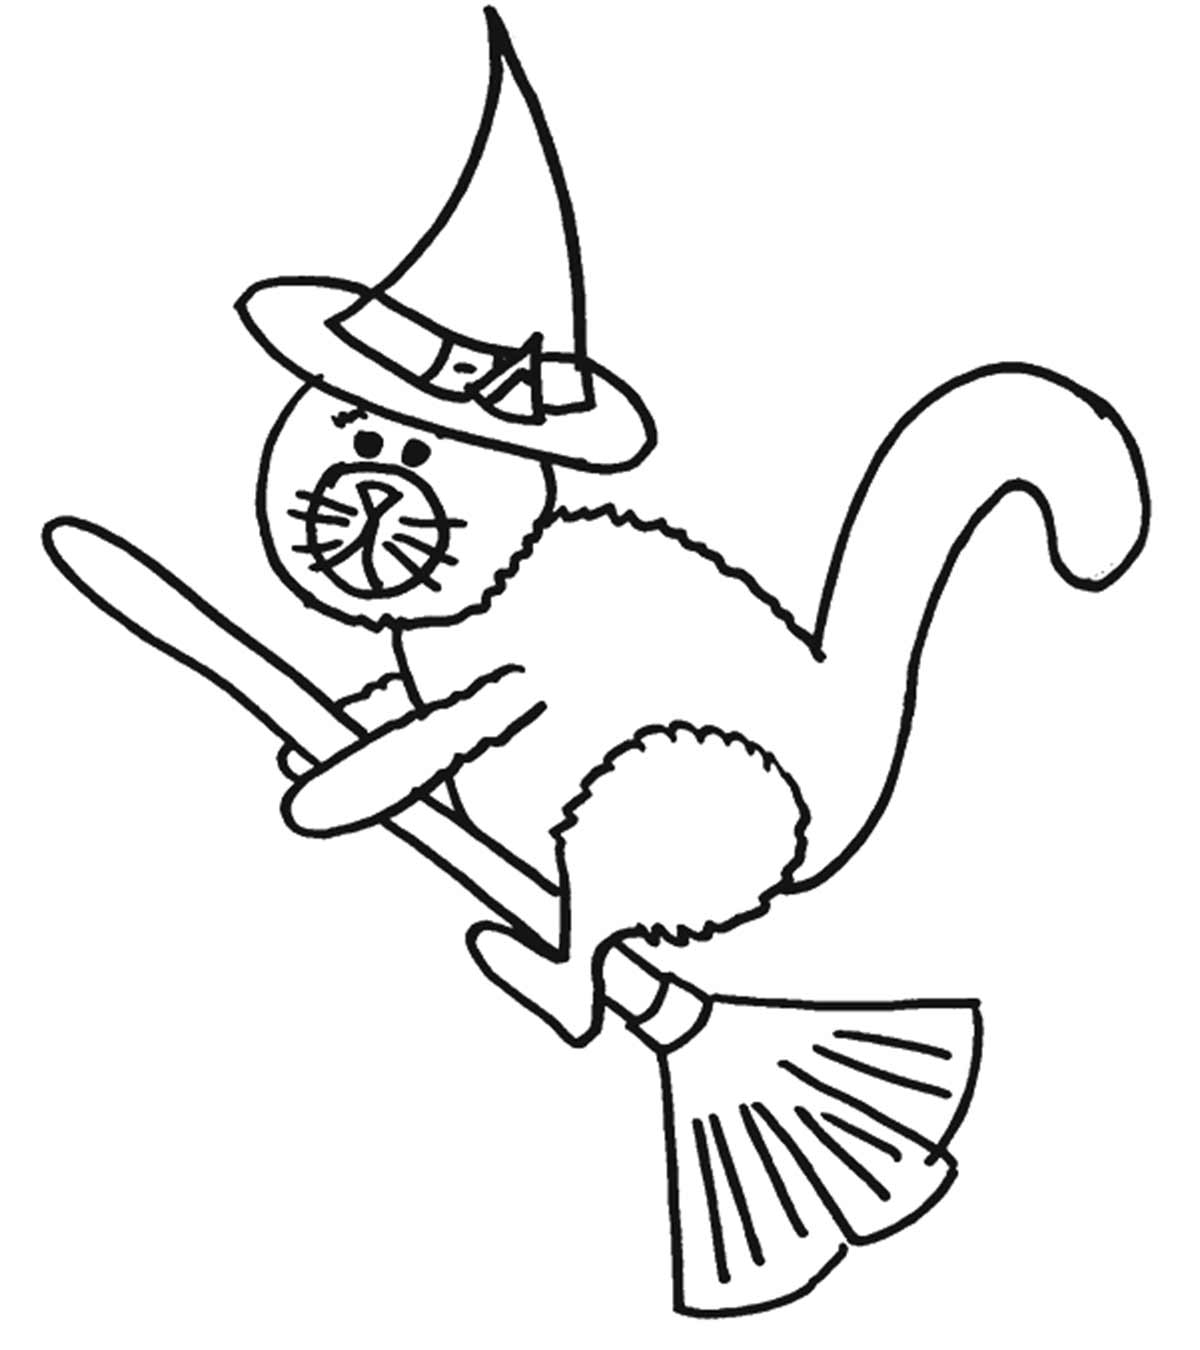 Top 25 Halloween Coloring Pages For Your Little Ones